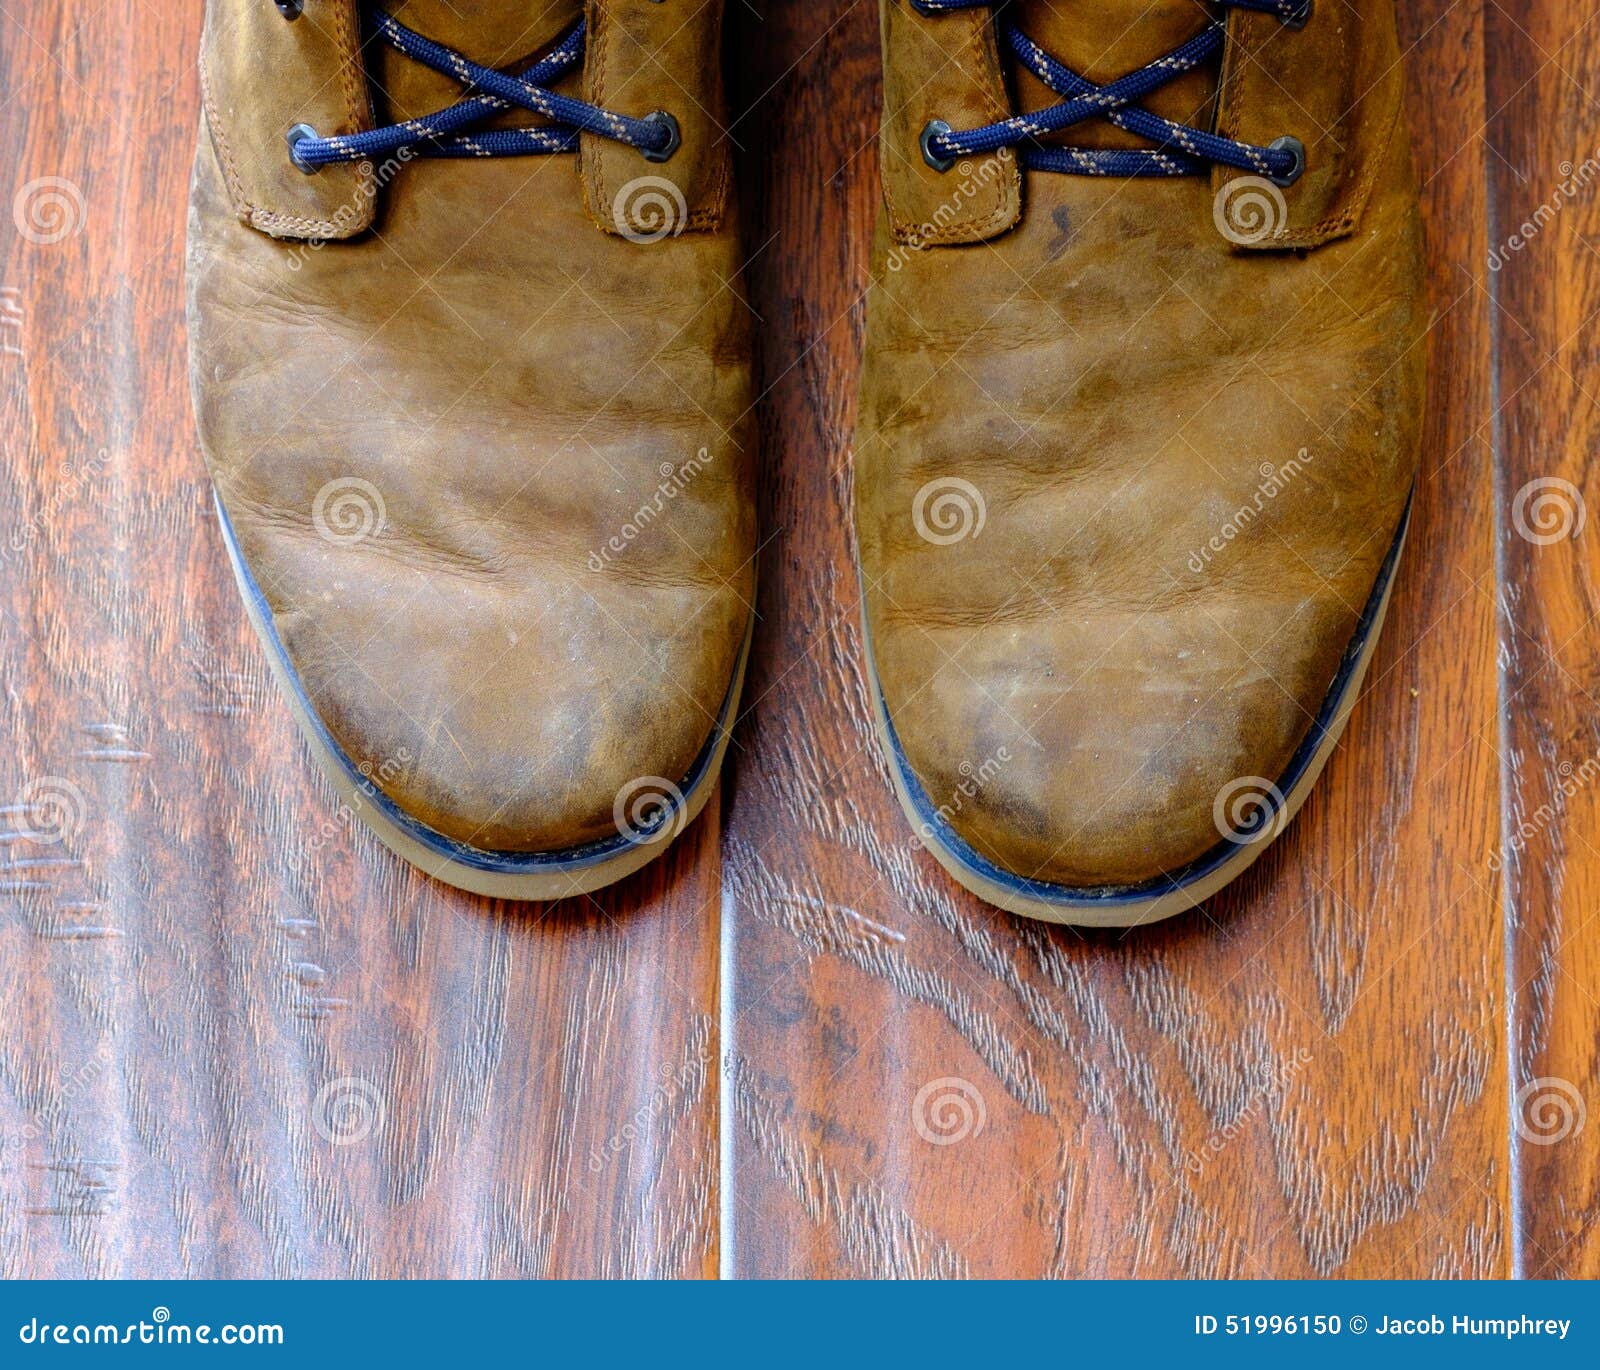 Worn Leather Boots on a Hardwood Floor Stock Photo - Image of male ...